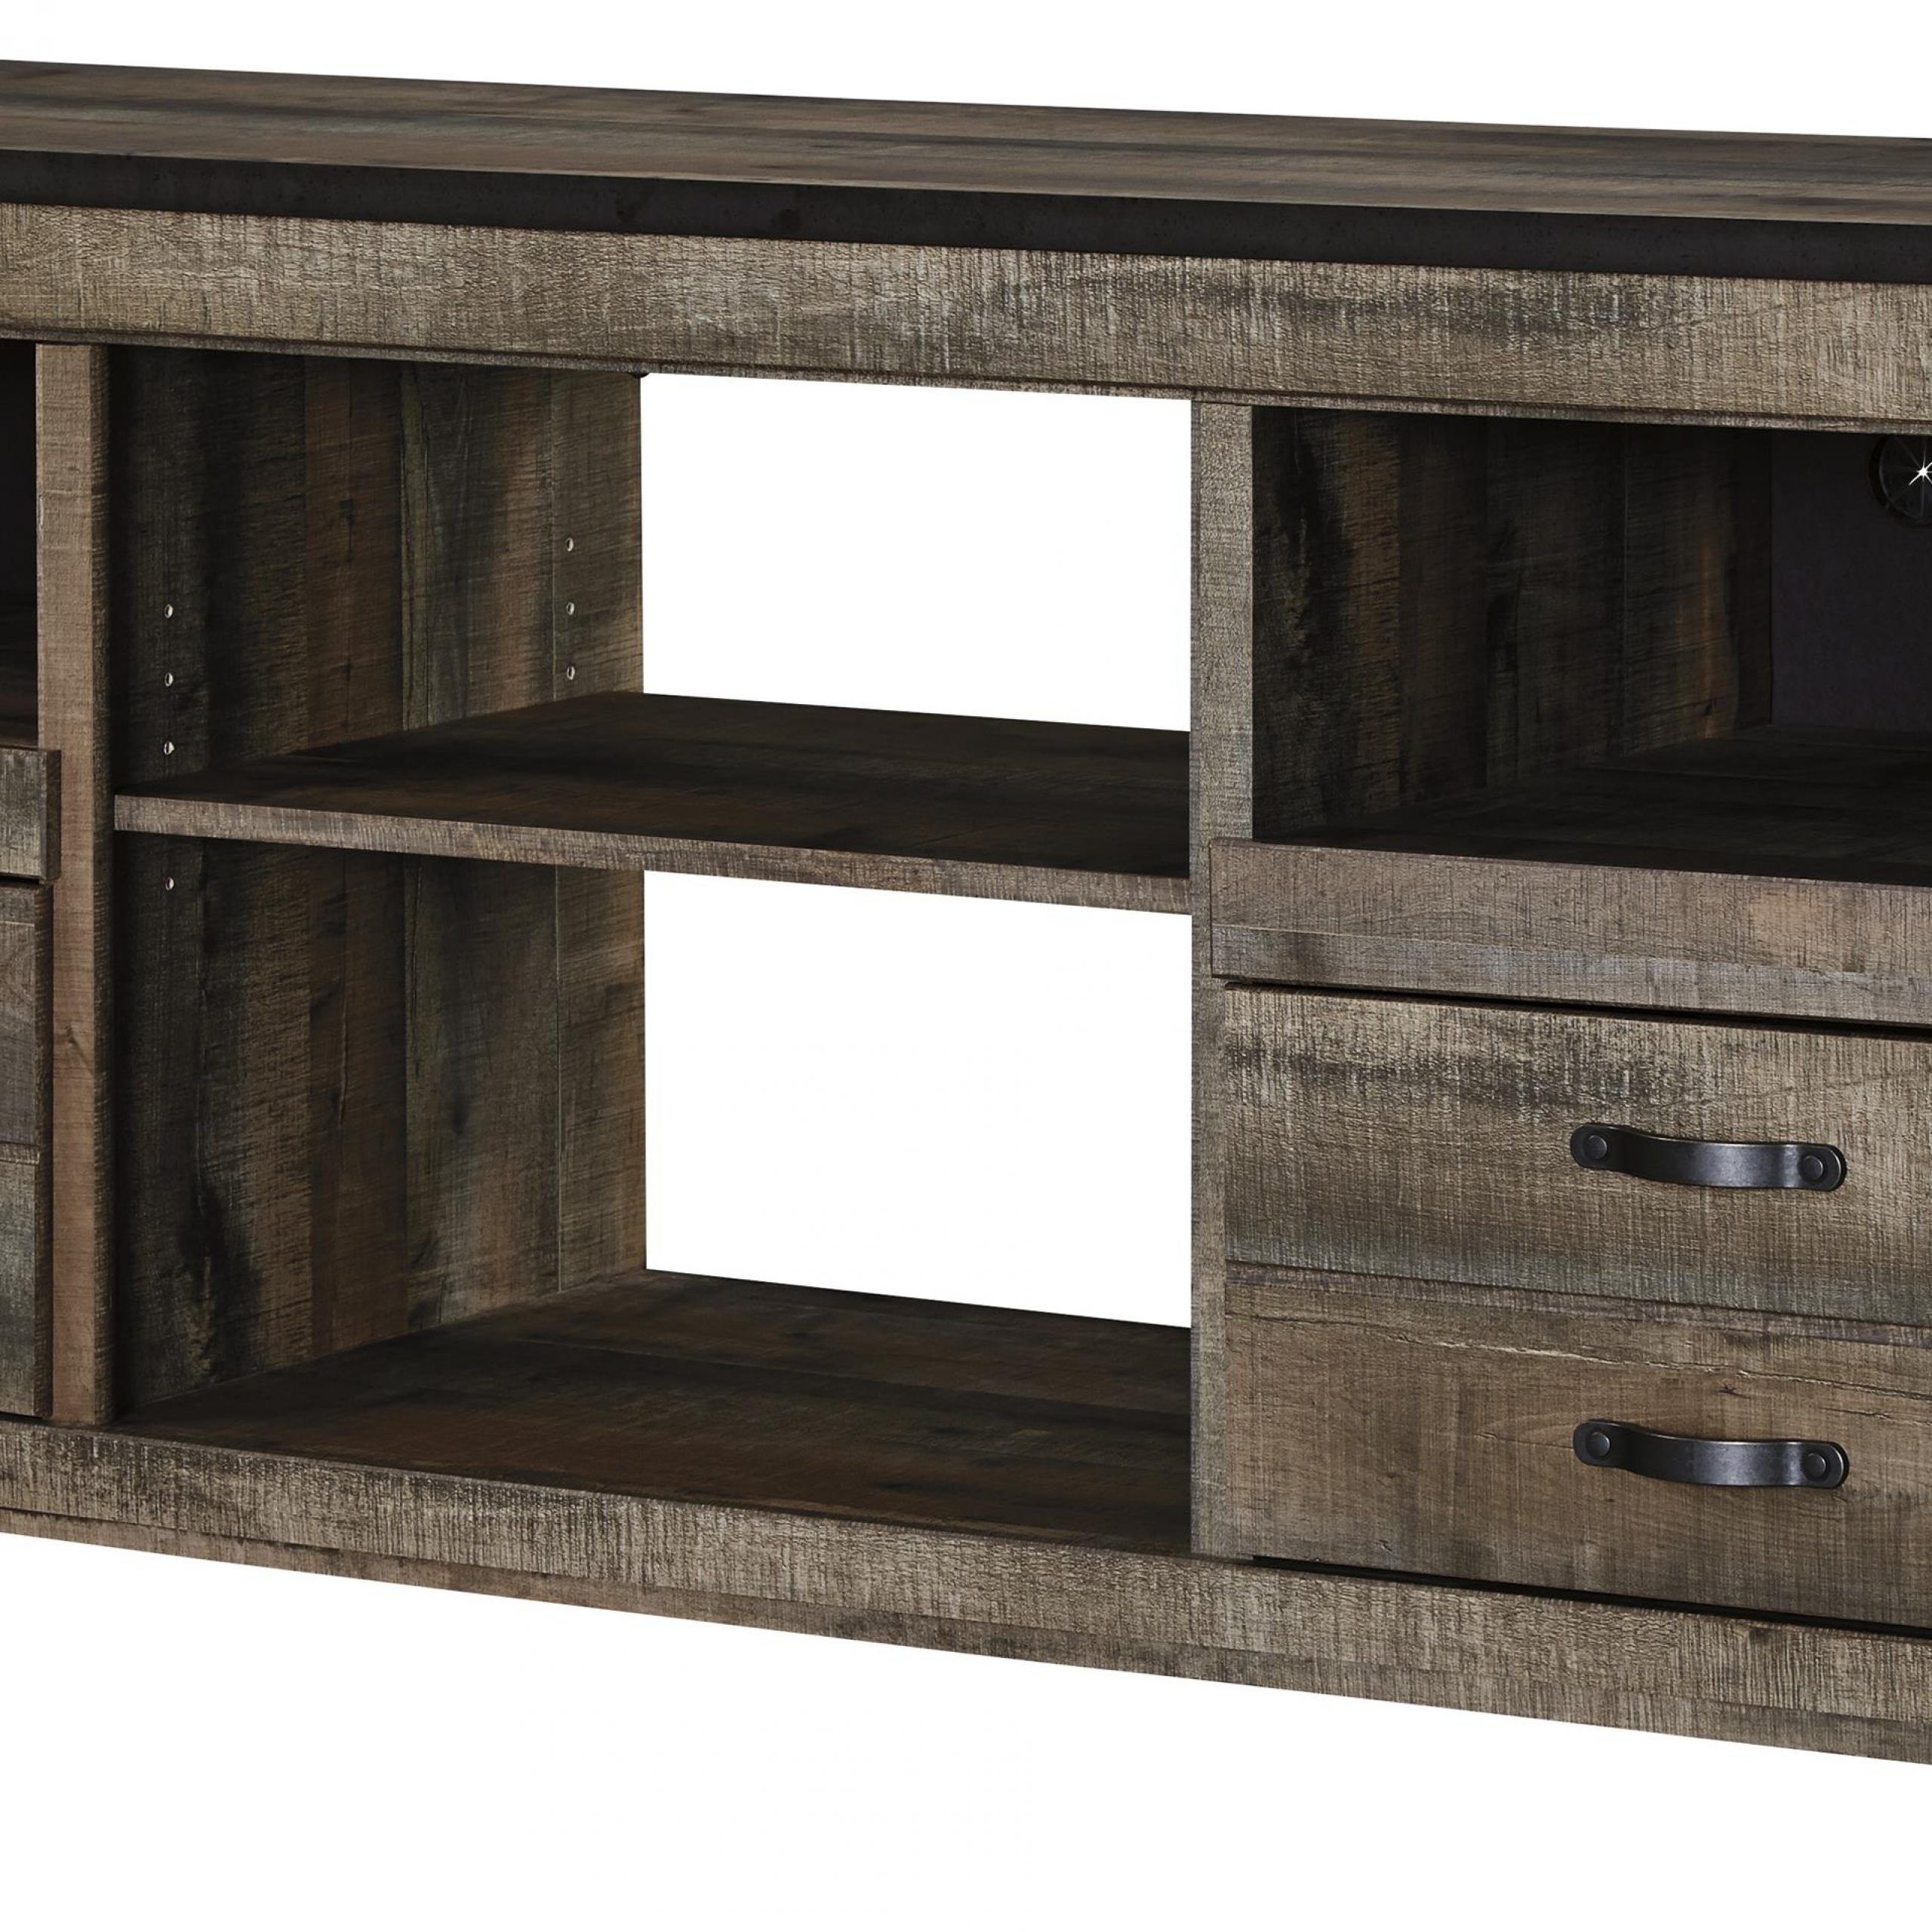 Vendor 3 Trinell 0170085 Rustic Large Tv Stand With Metal Intended For Chromium Extra Wide Tv Unit Stands (View 9 of 20)